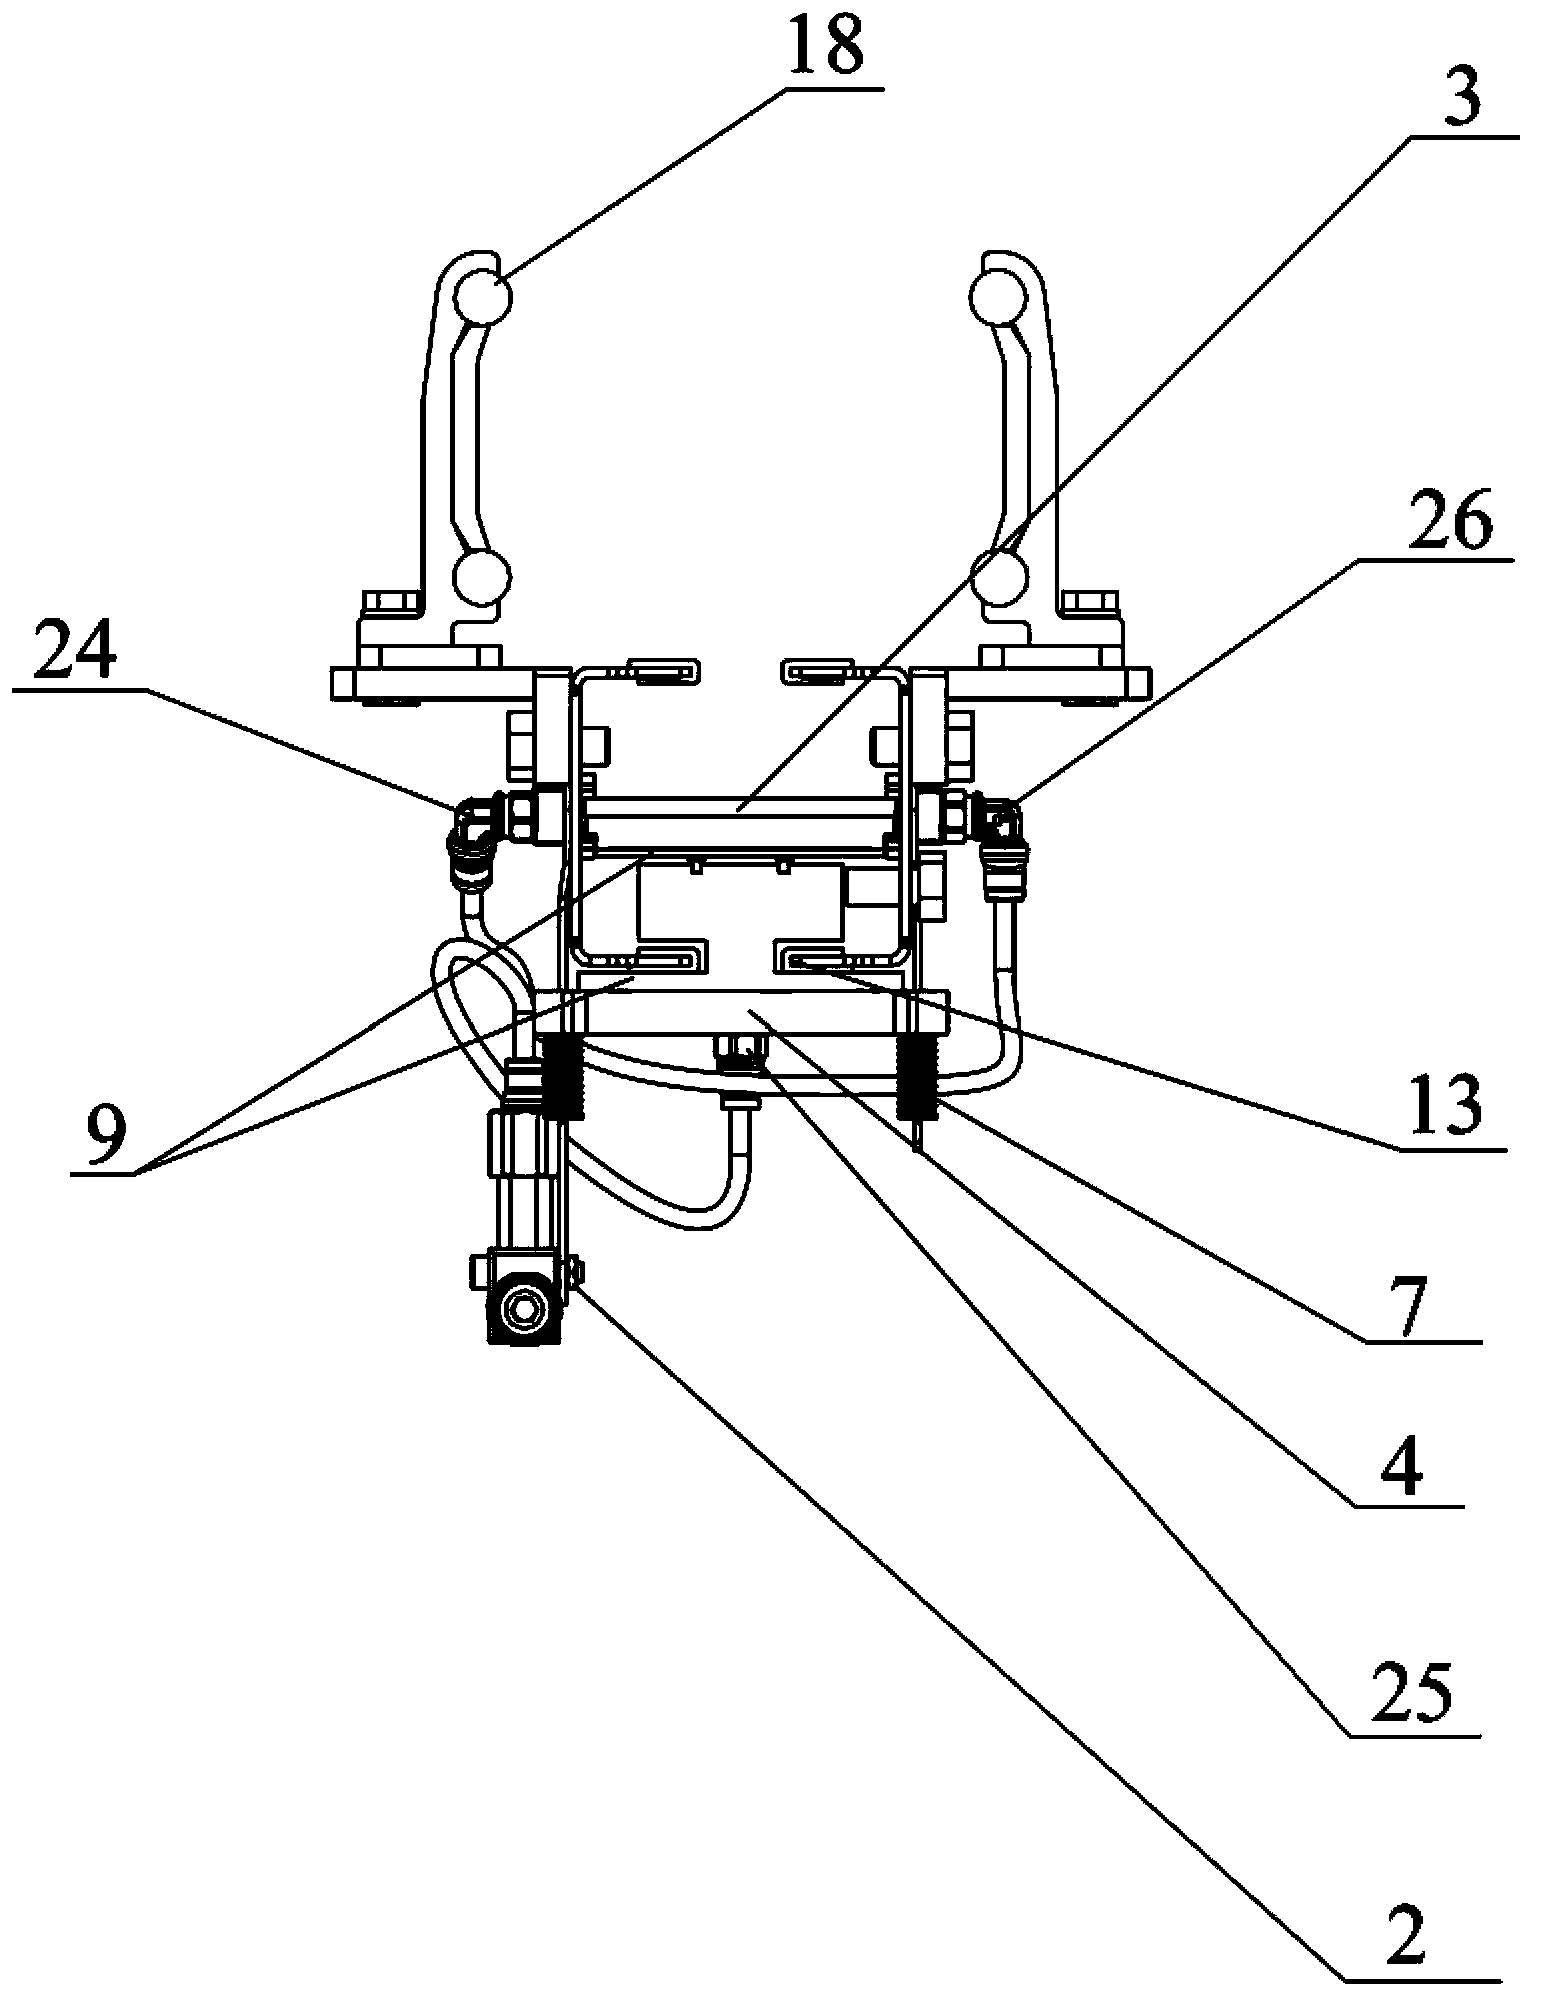 Self-lubrication device for conveying production line